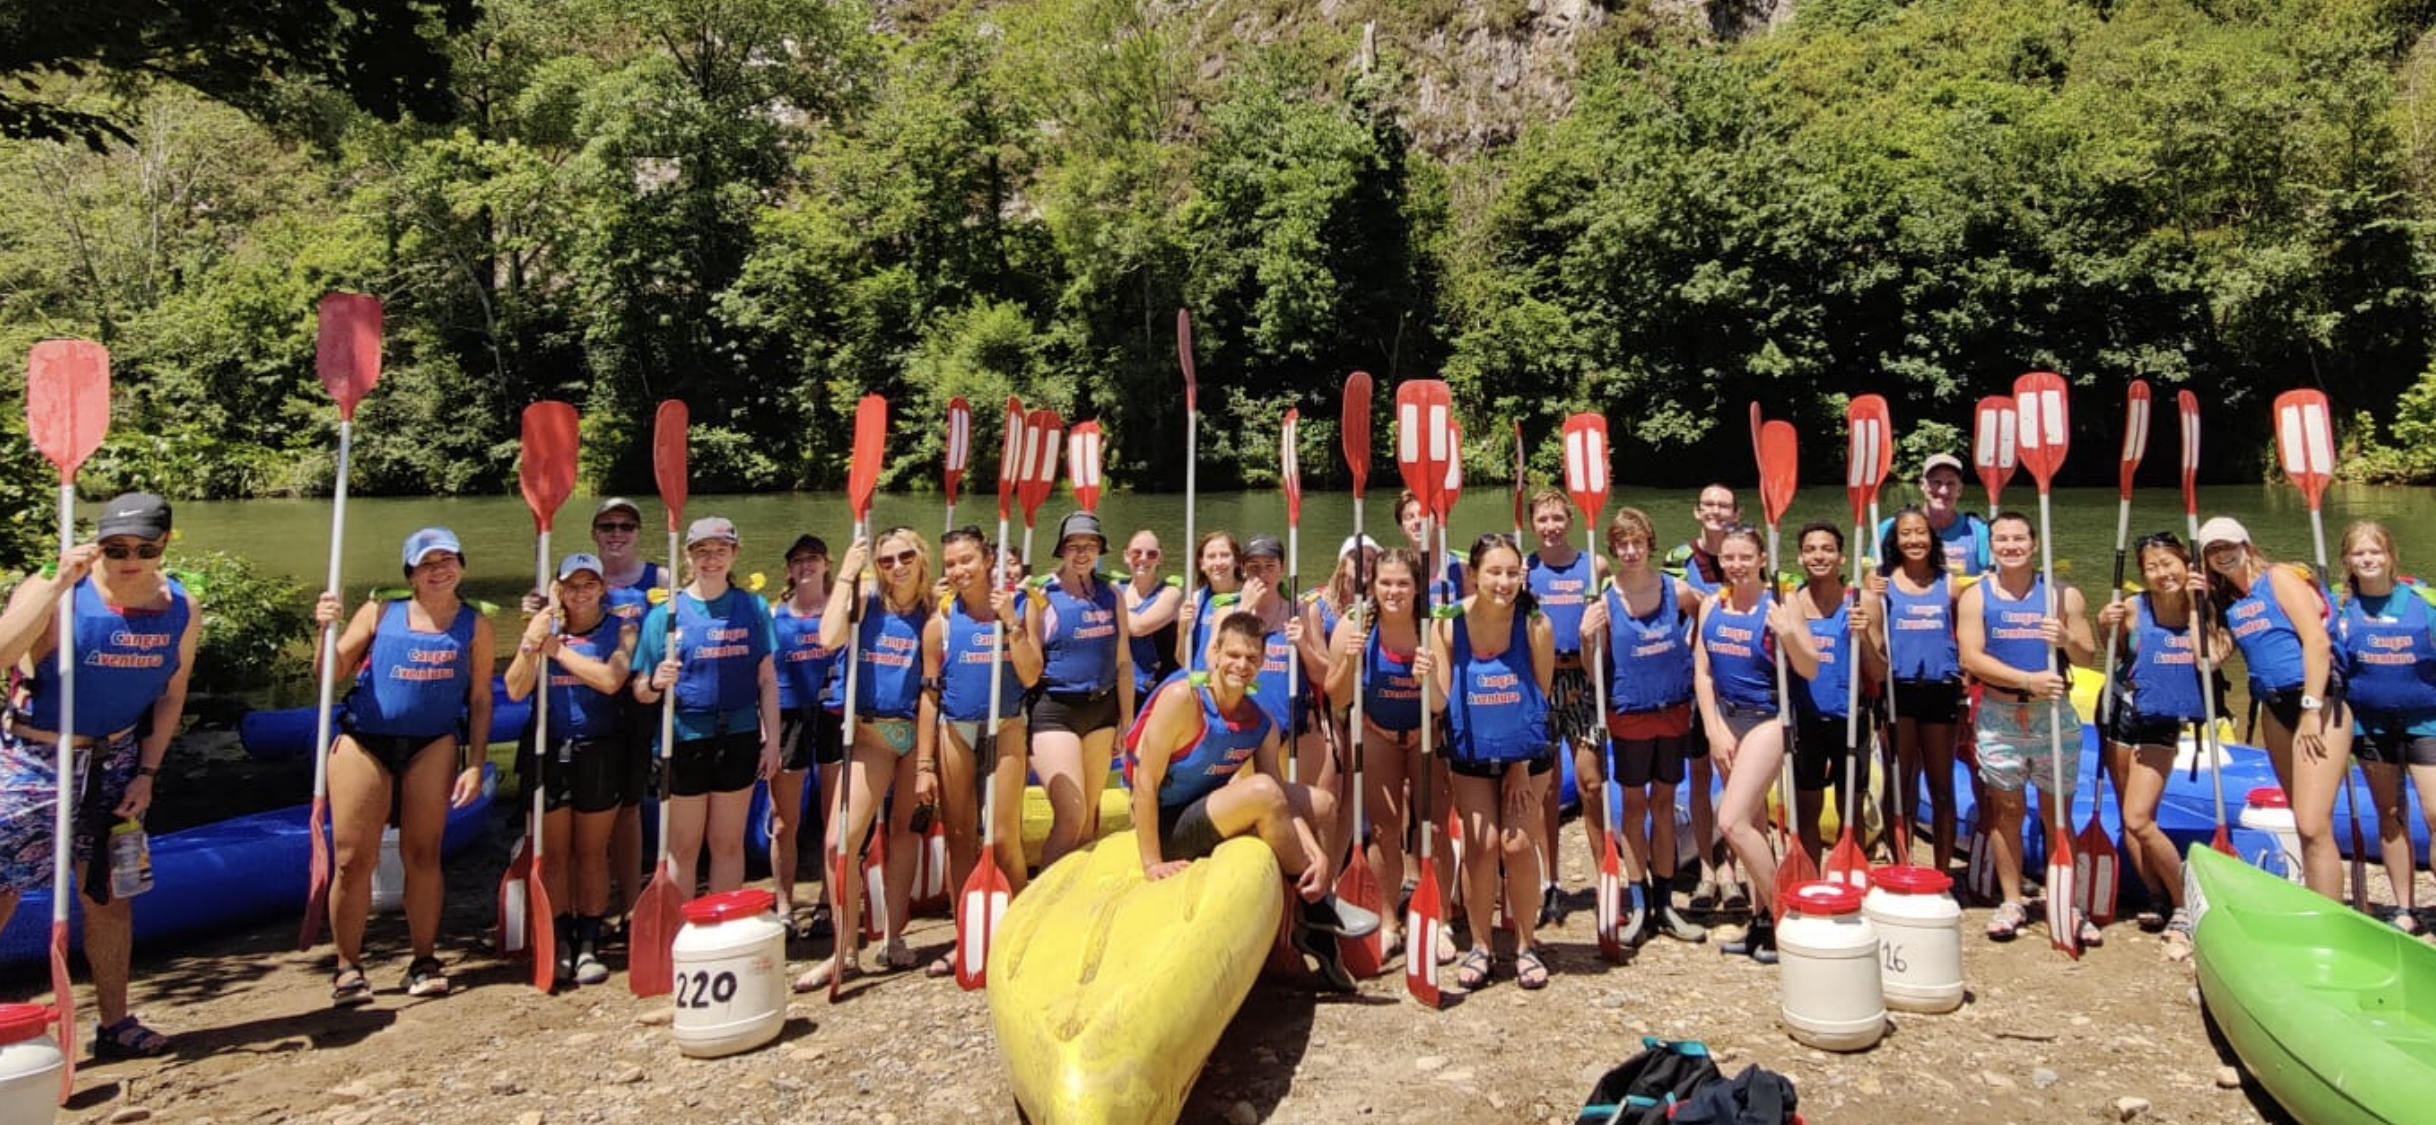 A group of students poses while holding paddles before kayaking